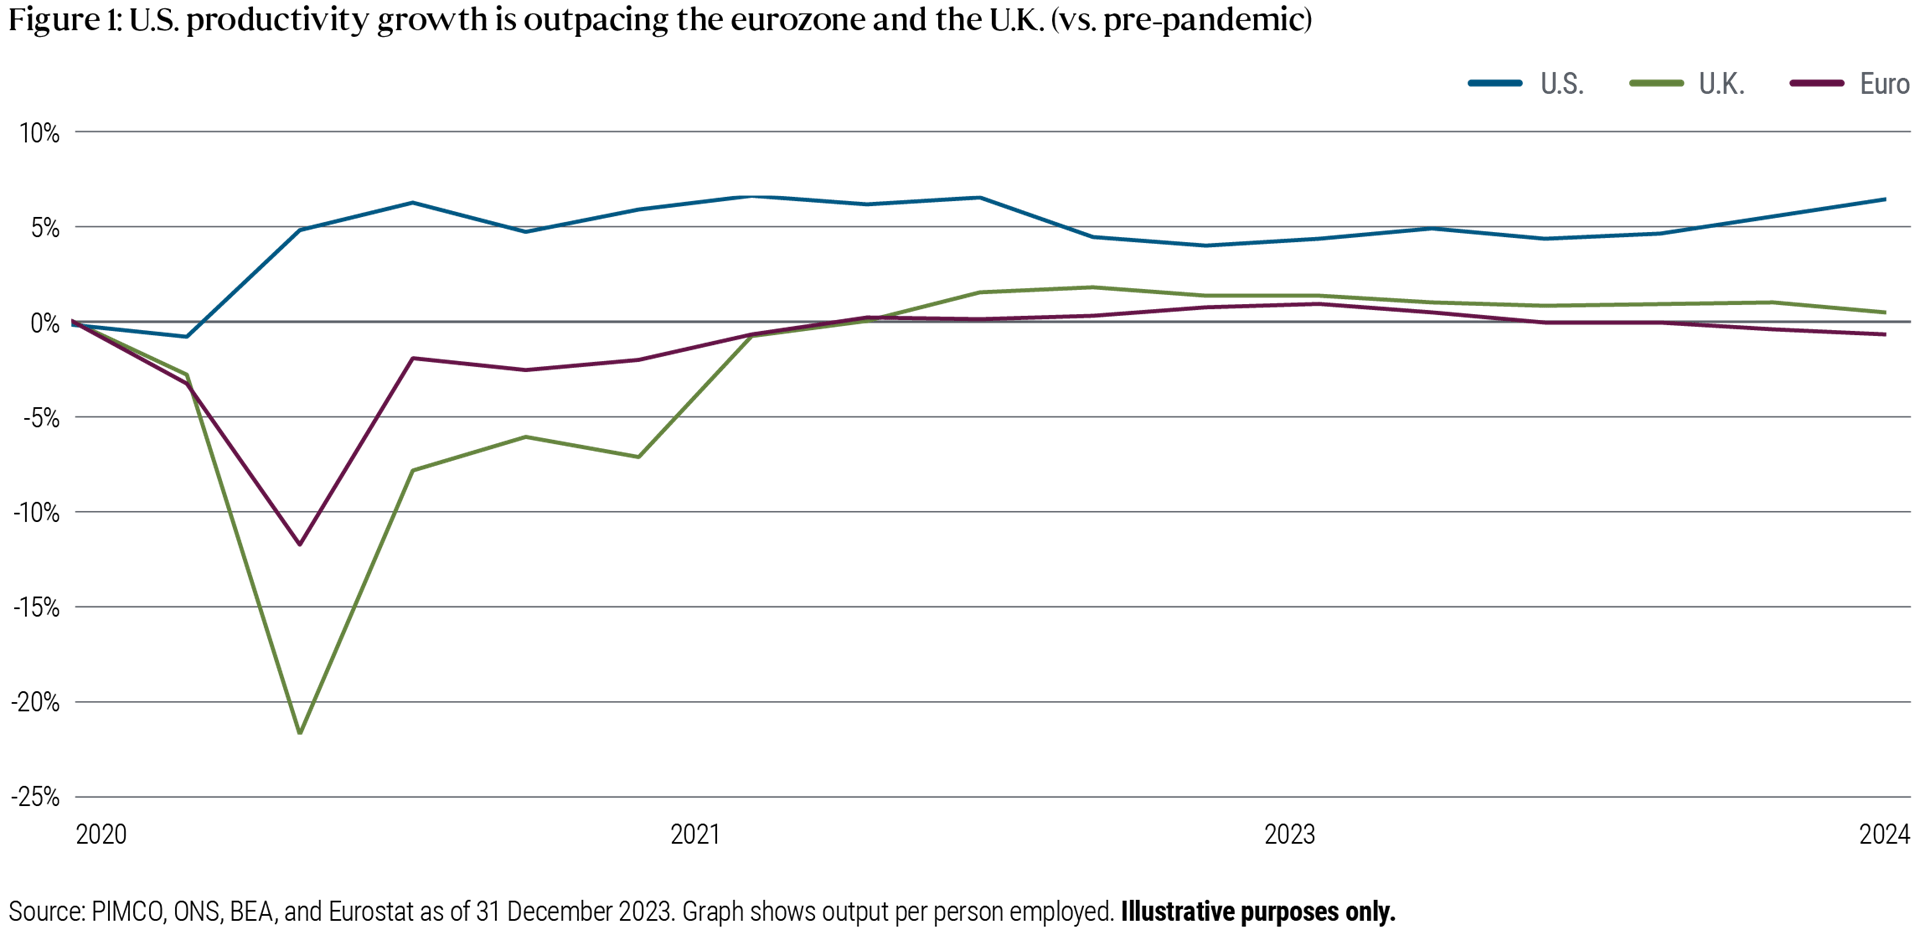 Figure 1 shows productivity growth in the US, UK and eurozone, as measured by output per person employed, from 1 January 2020 to 31 December 2023. During this time, US productivity has grown much more than productivity in the UK and eurozone, with growth of over 5% by the end of 2023 compared to just over 0% for the UK and just under 0% in the eurozone.